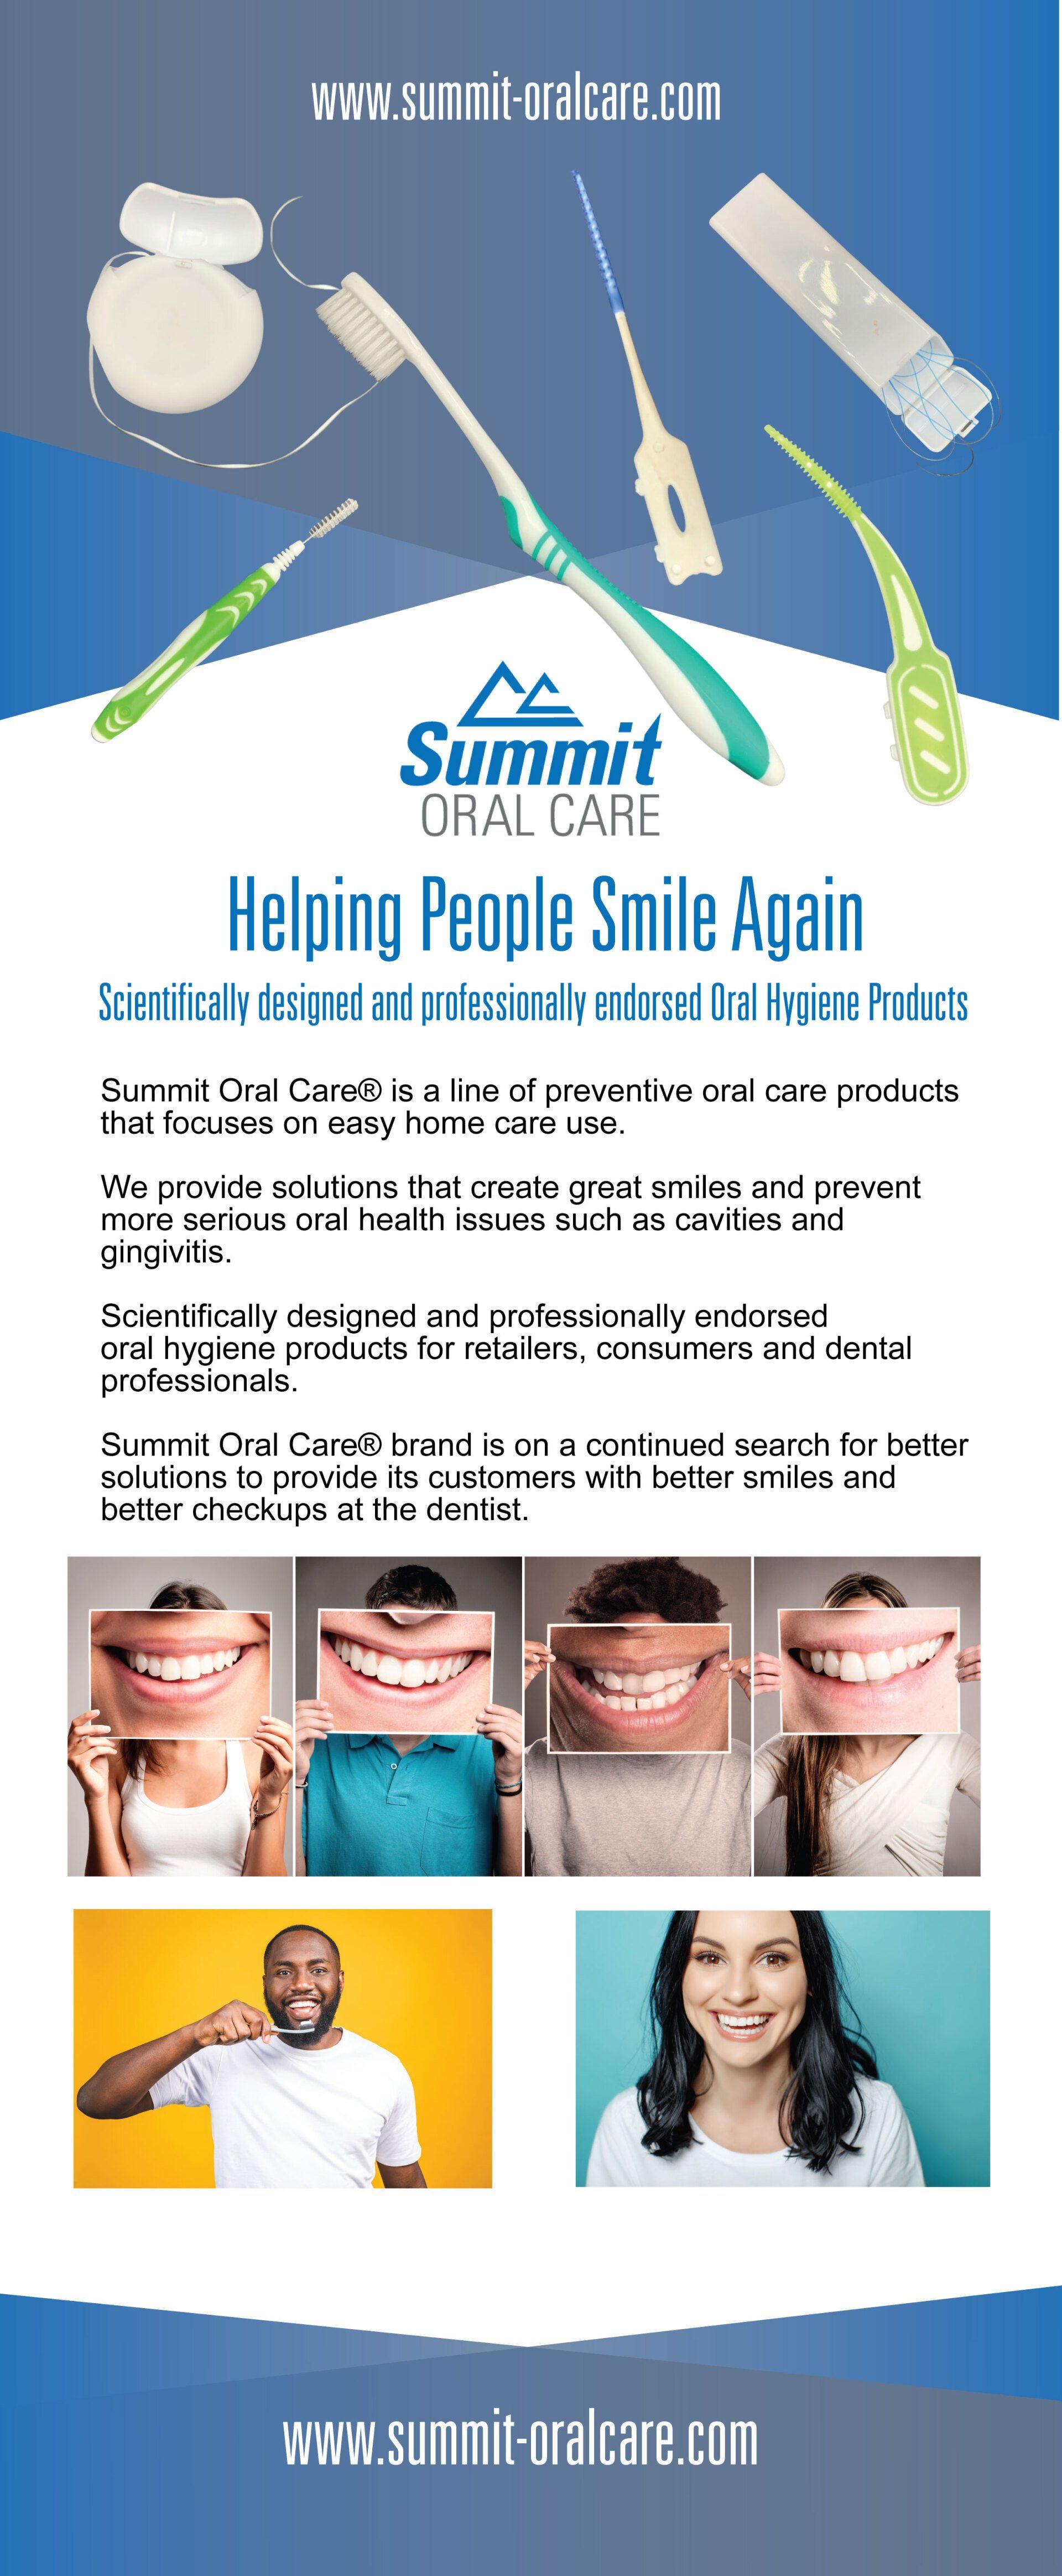 an advertisement for summit oral care helping people smile again